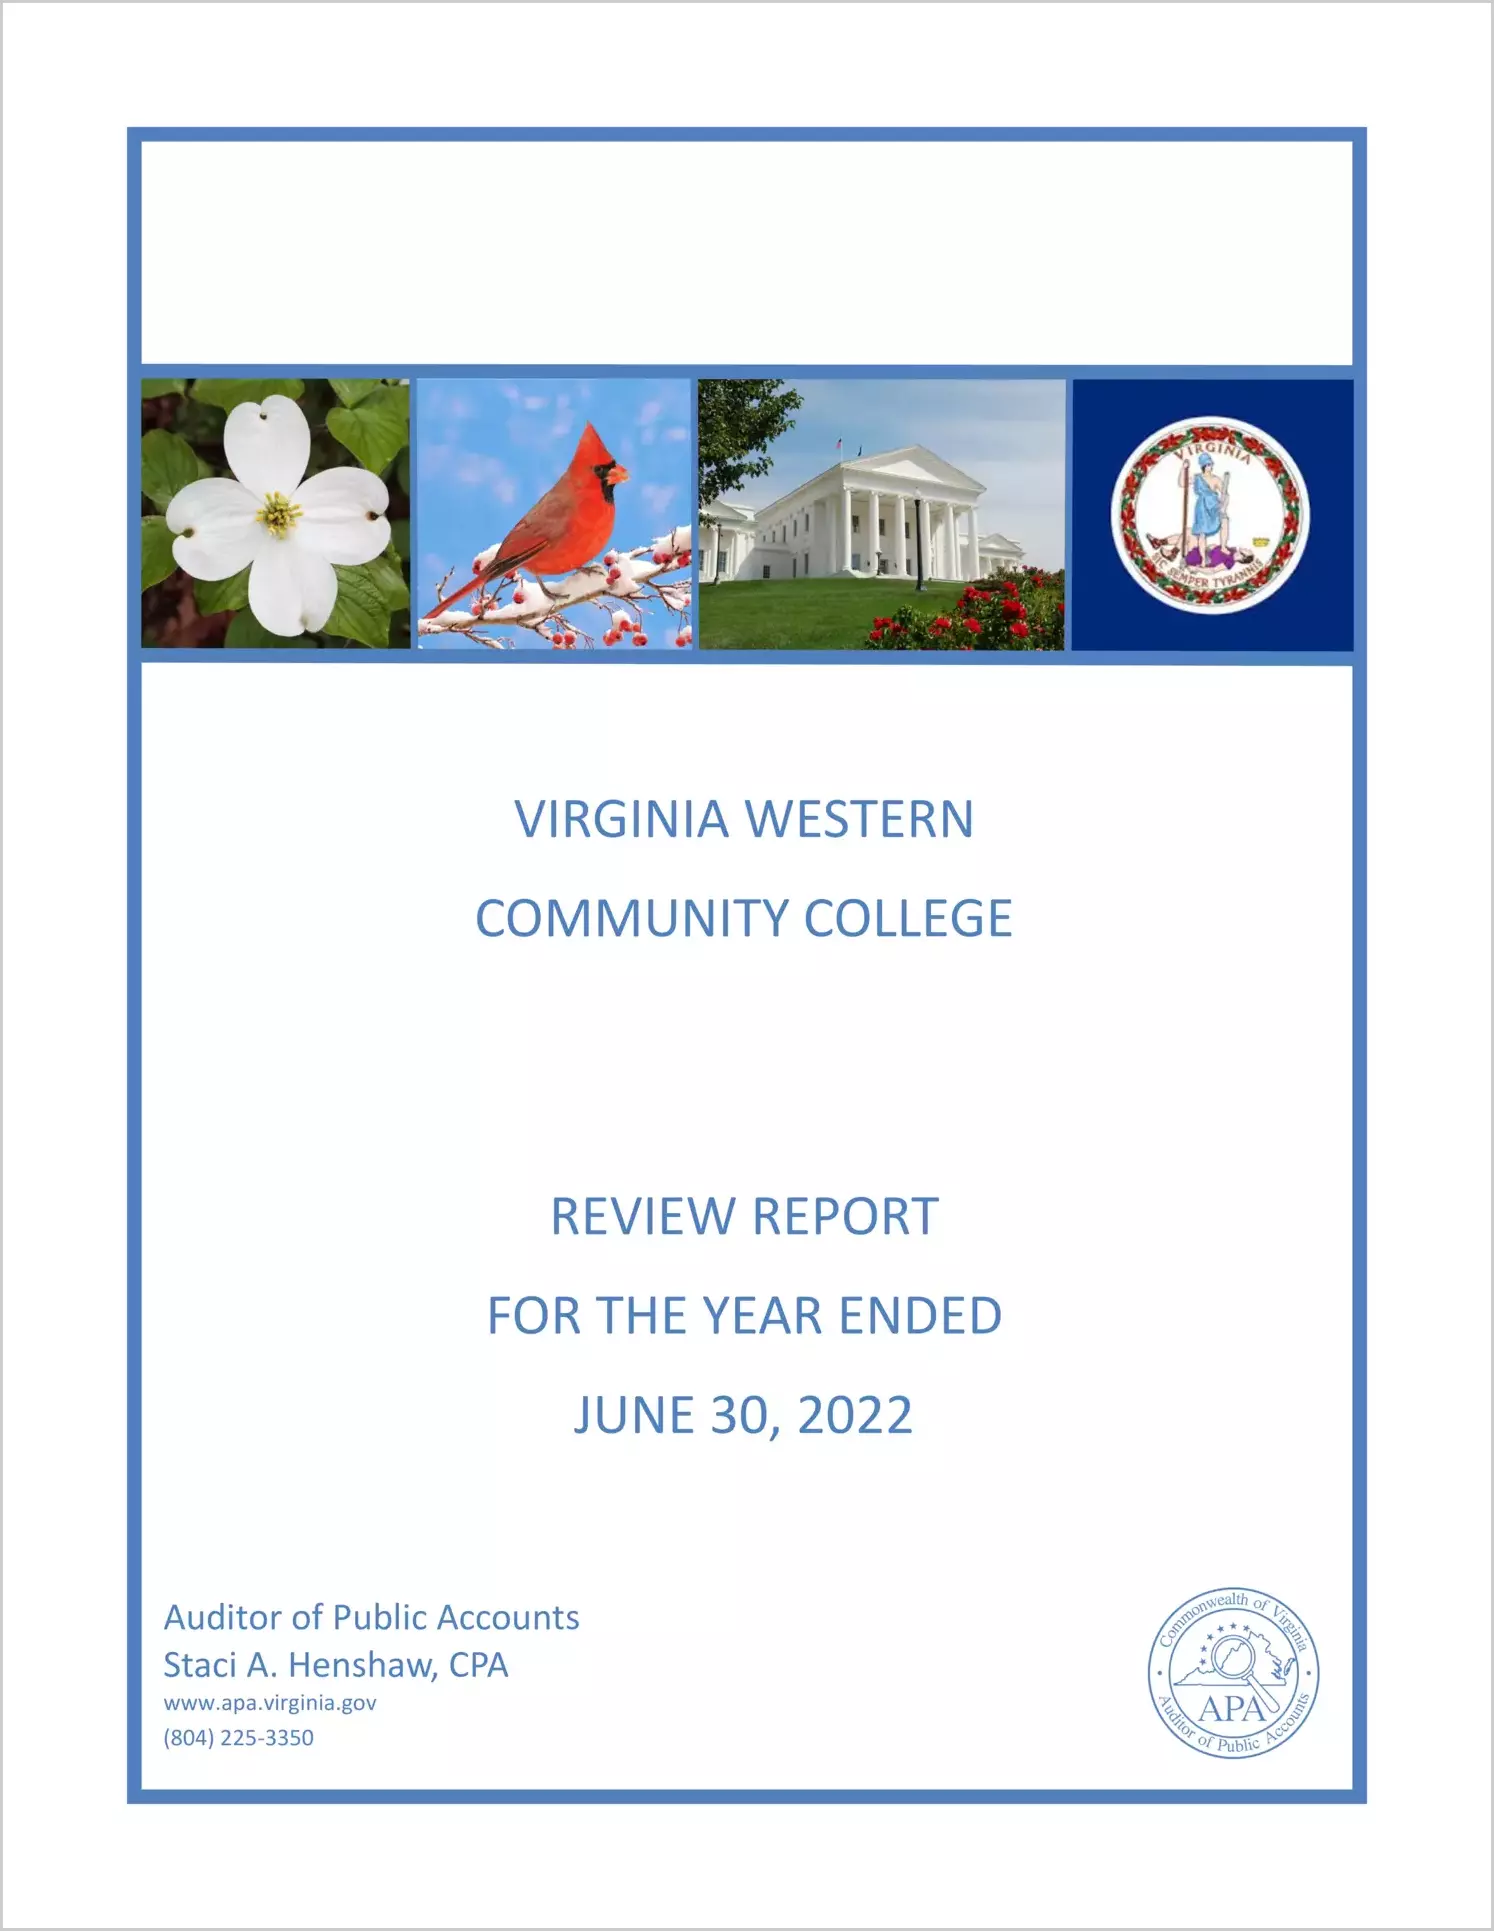 Virginia Western Community College Reaccreditation Review for the year ended June 30, 2022